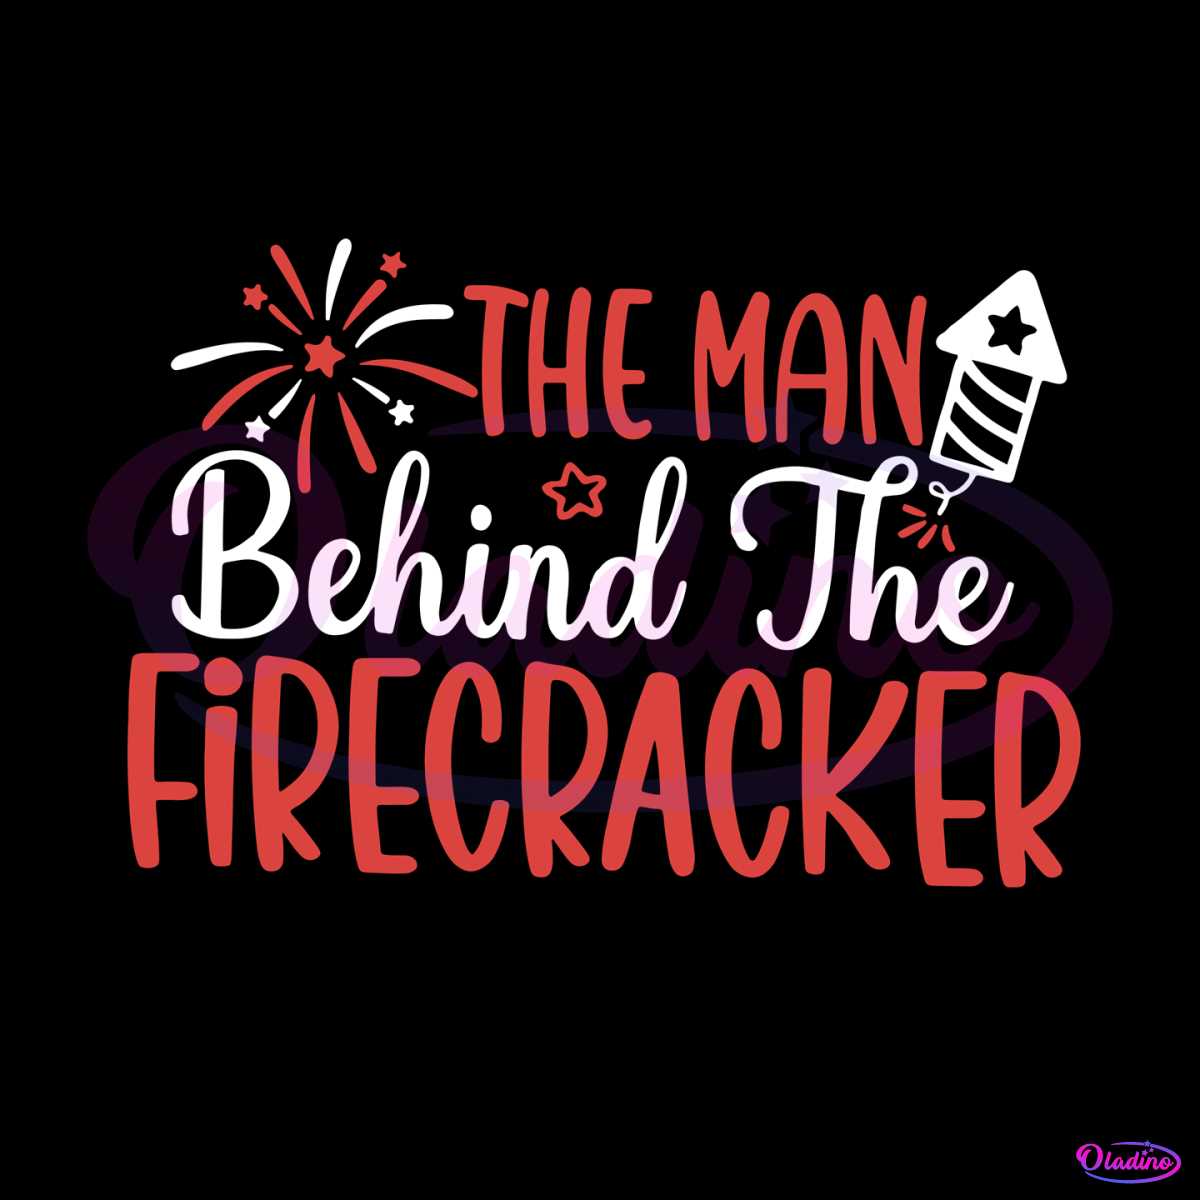 july-fourth-the-man-behind-the-firecracker-svg-cutting-file